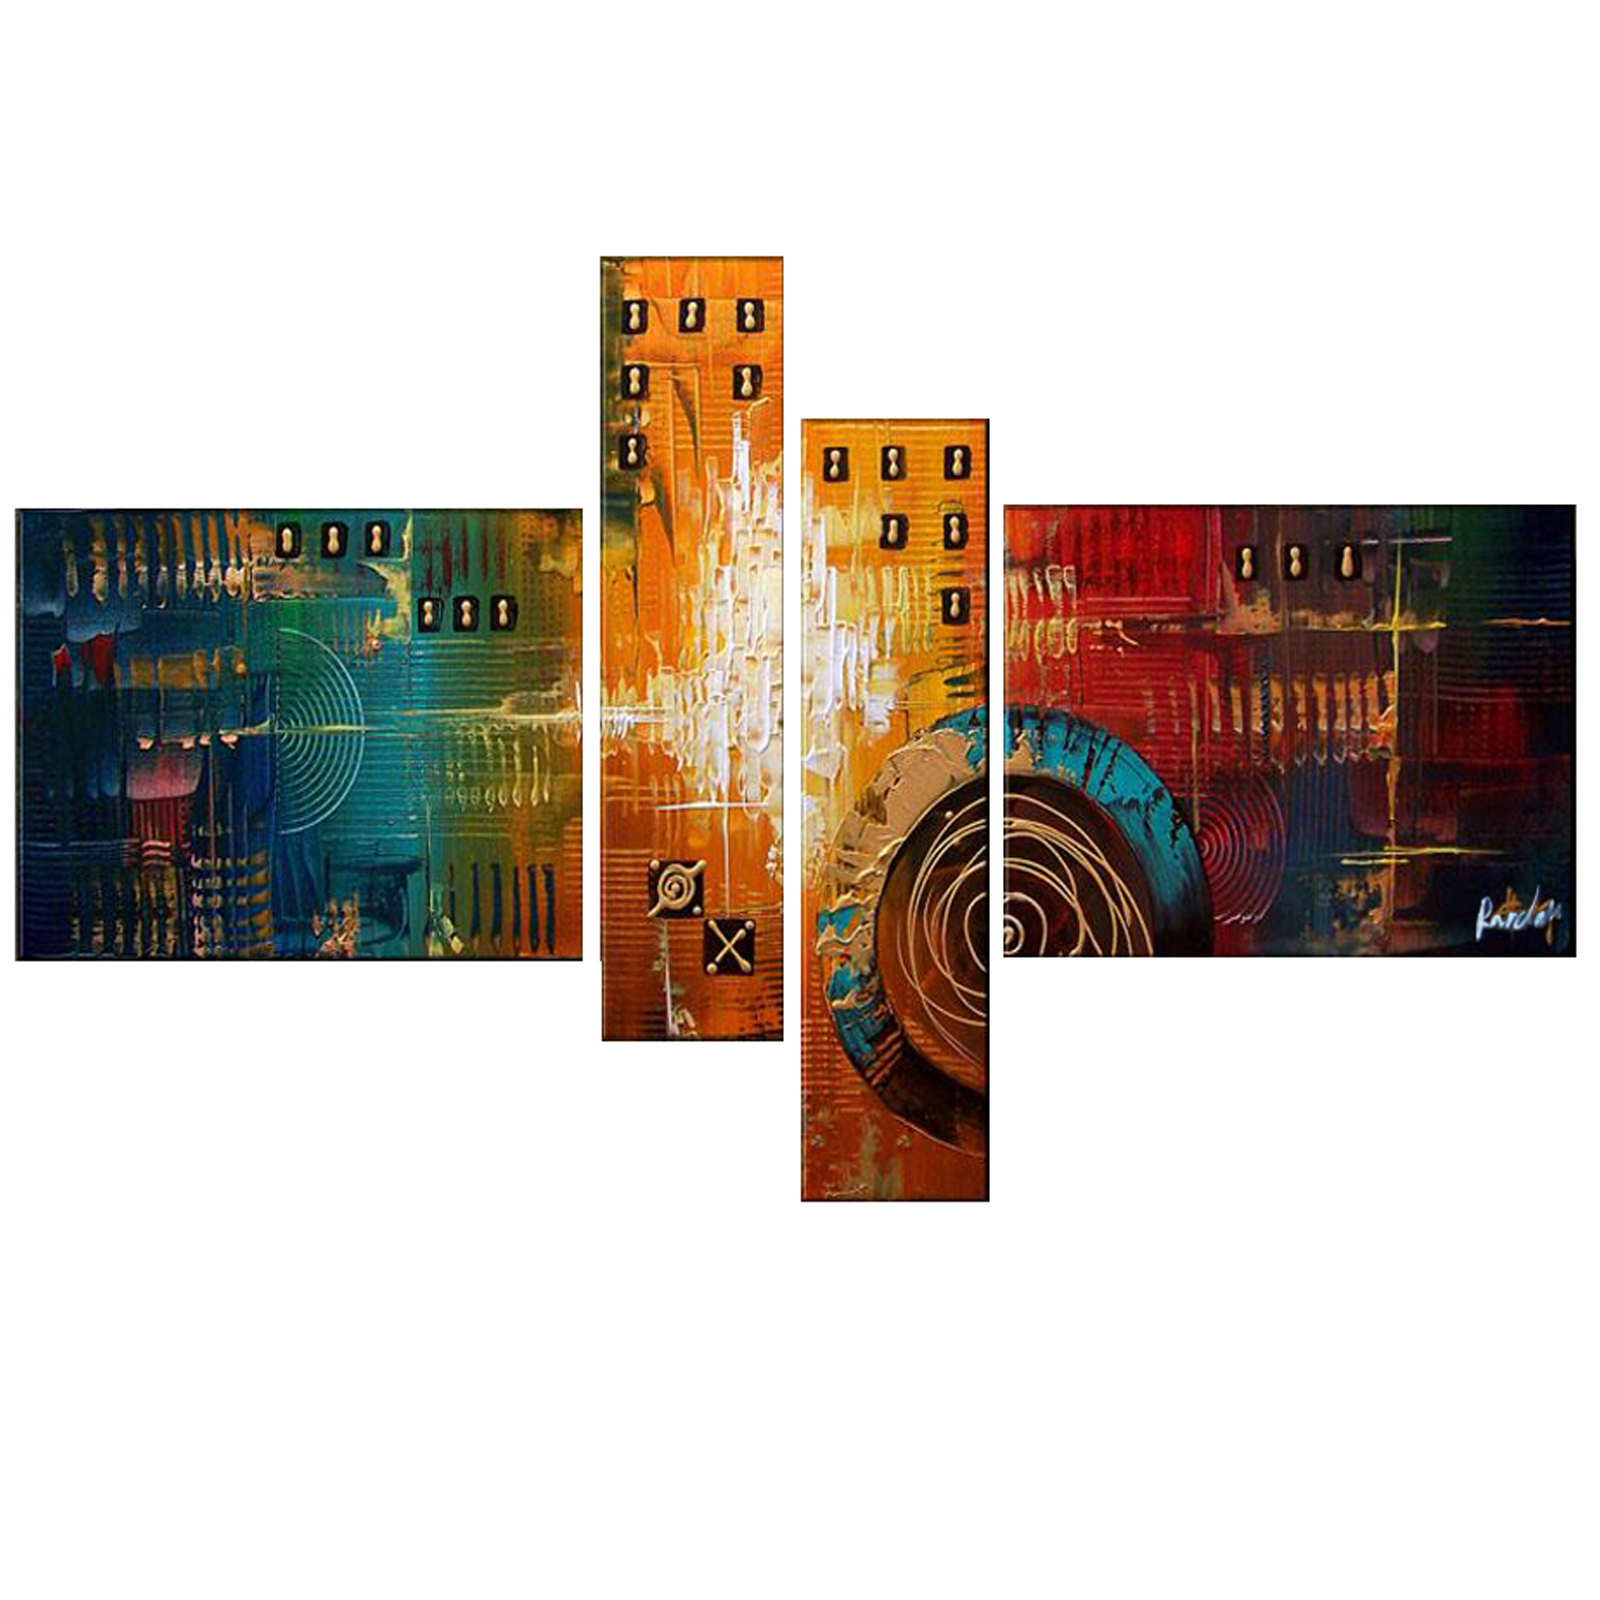 Multi-Color Textured Abstract Painting- 64 x 34 in - 4 Panels